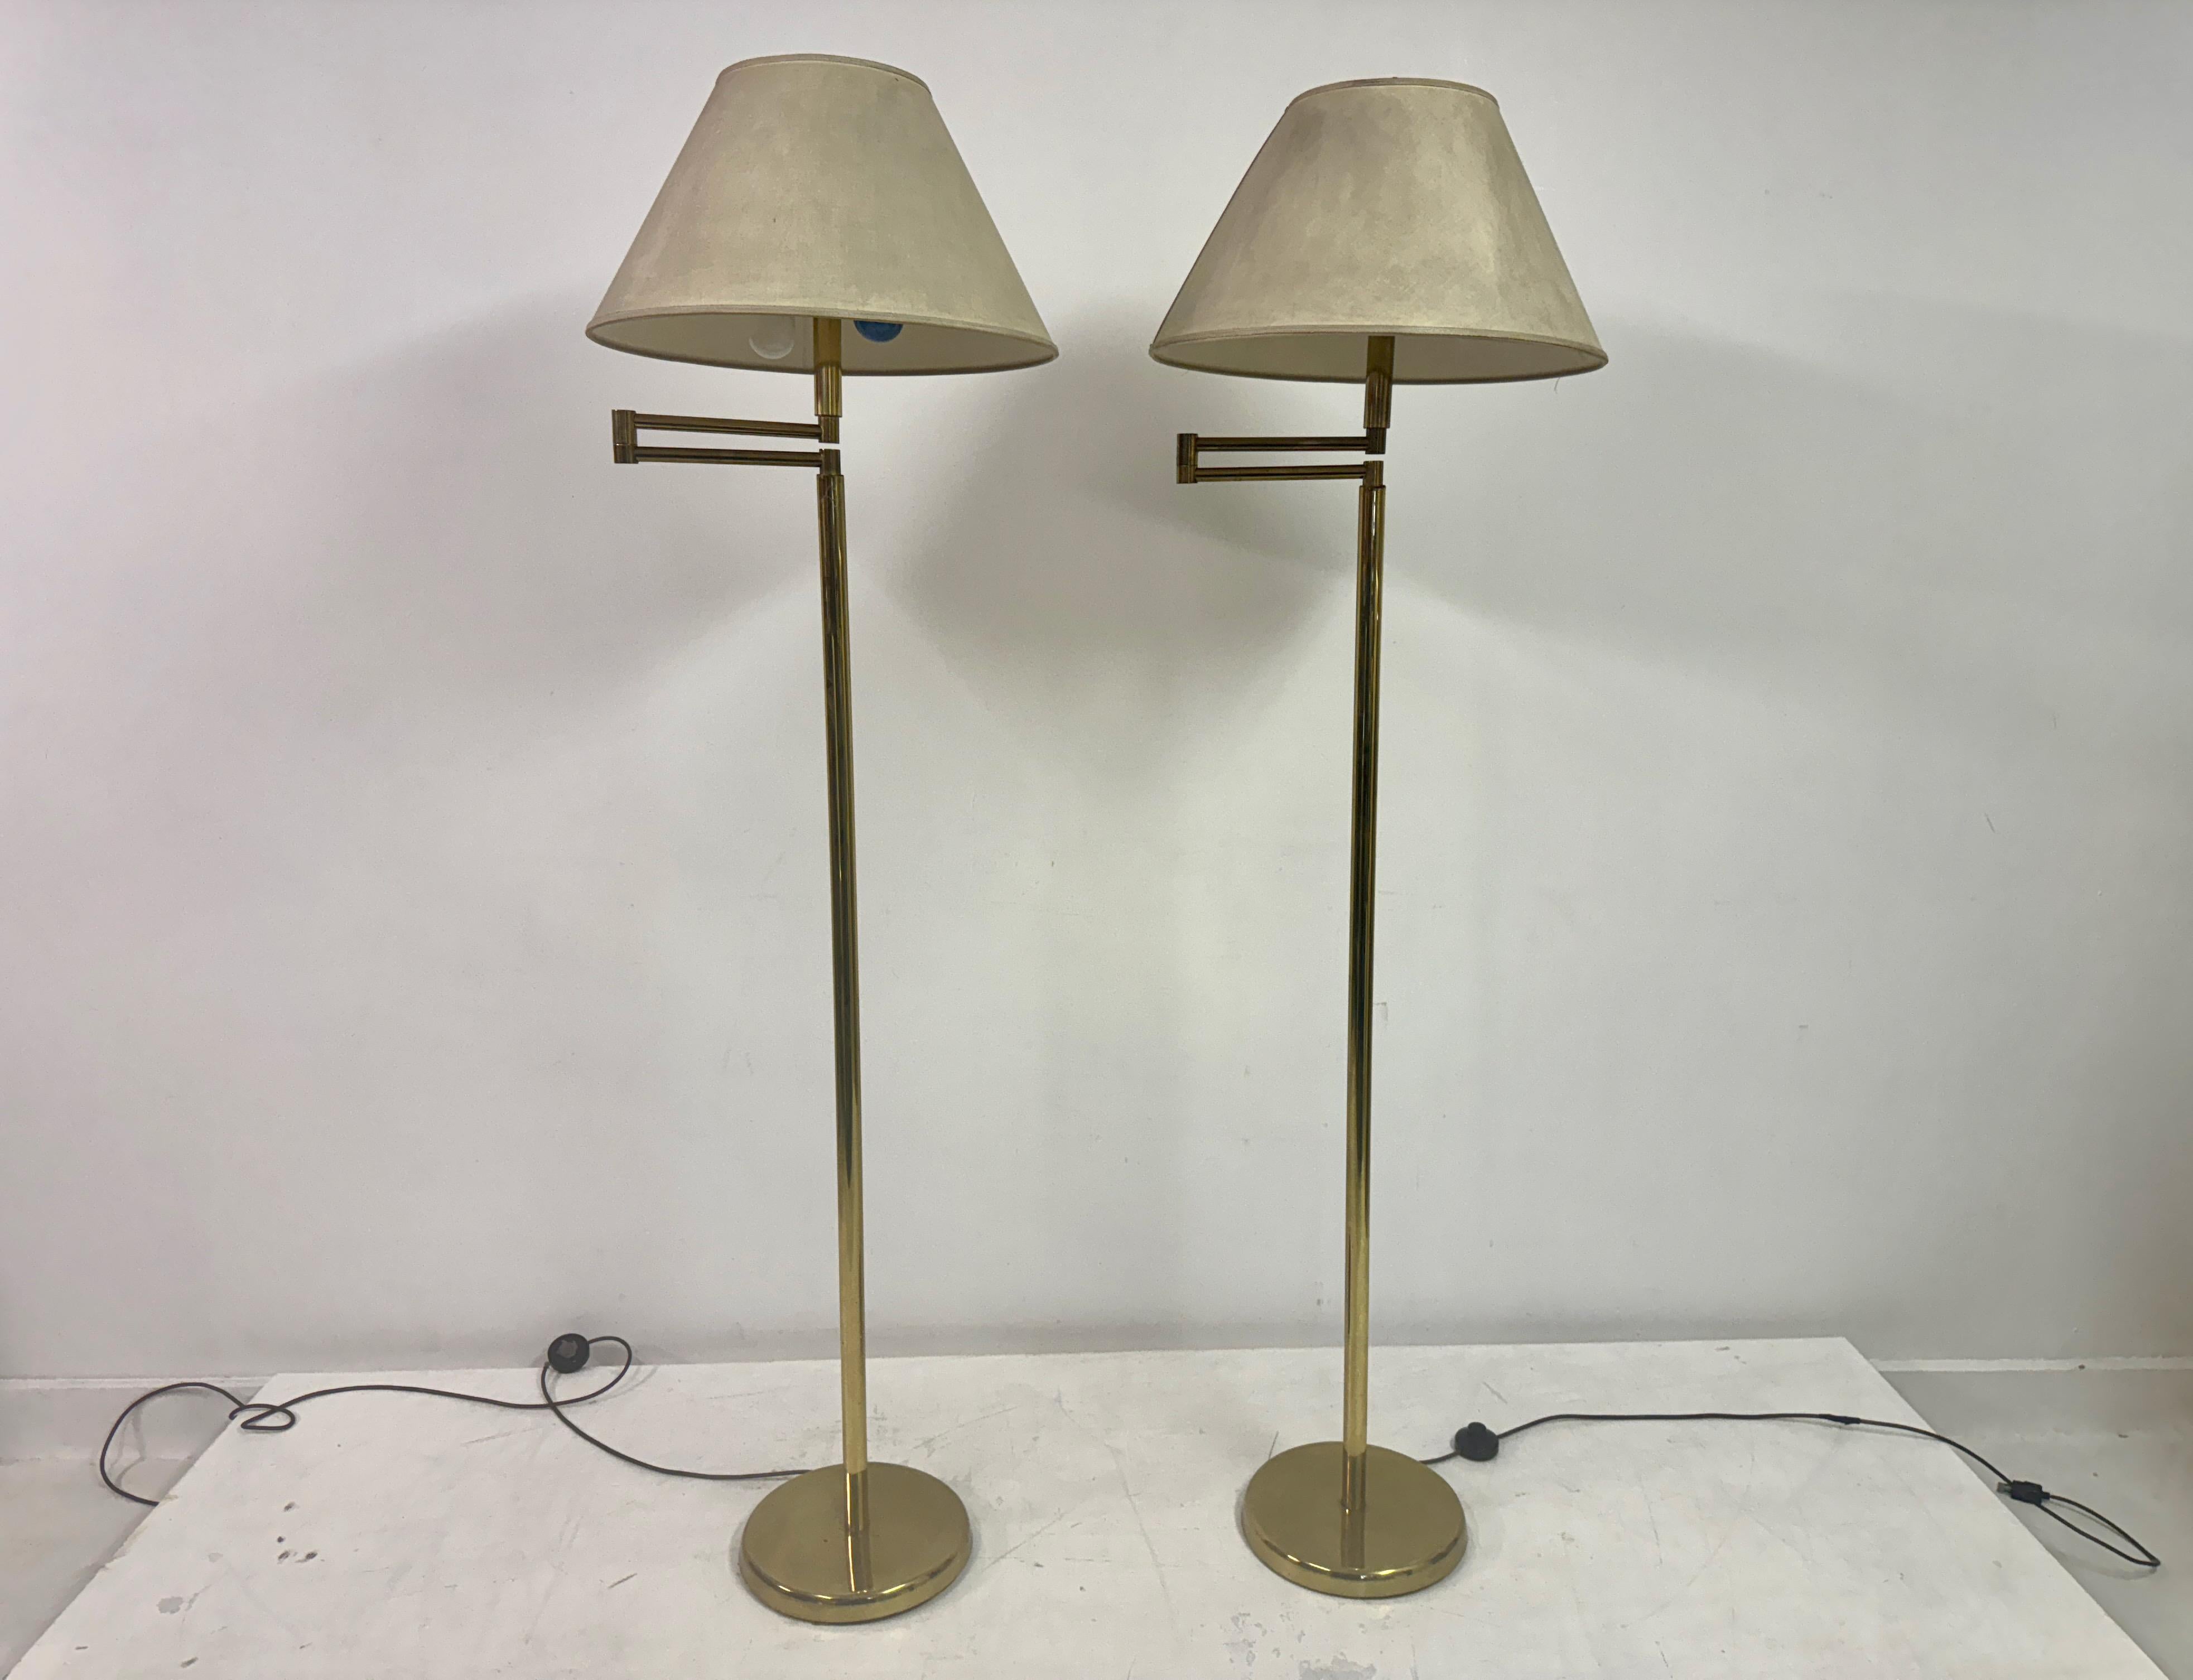 Pair of floor lamps

Swing arms

Brass

Original shades but are soiled

Dimensions are without shades

Italy 1970s